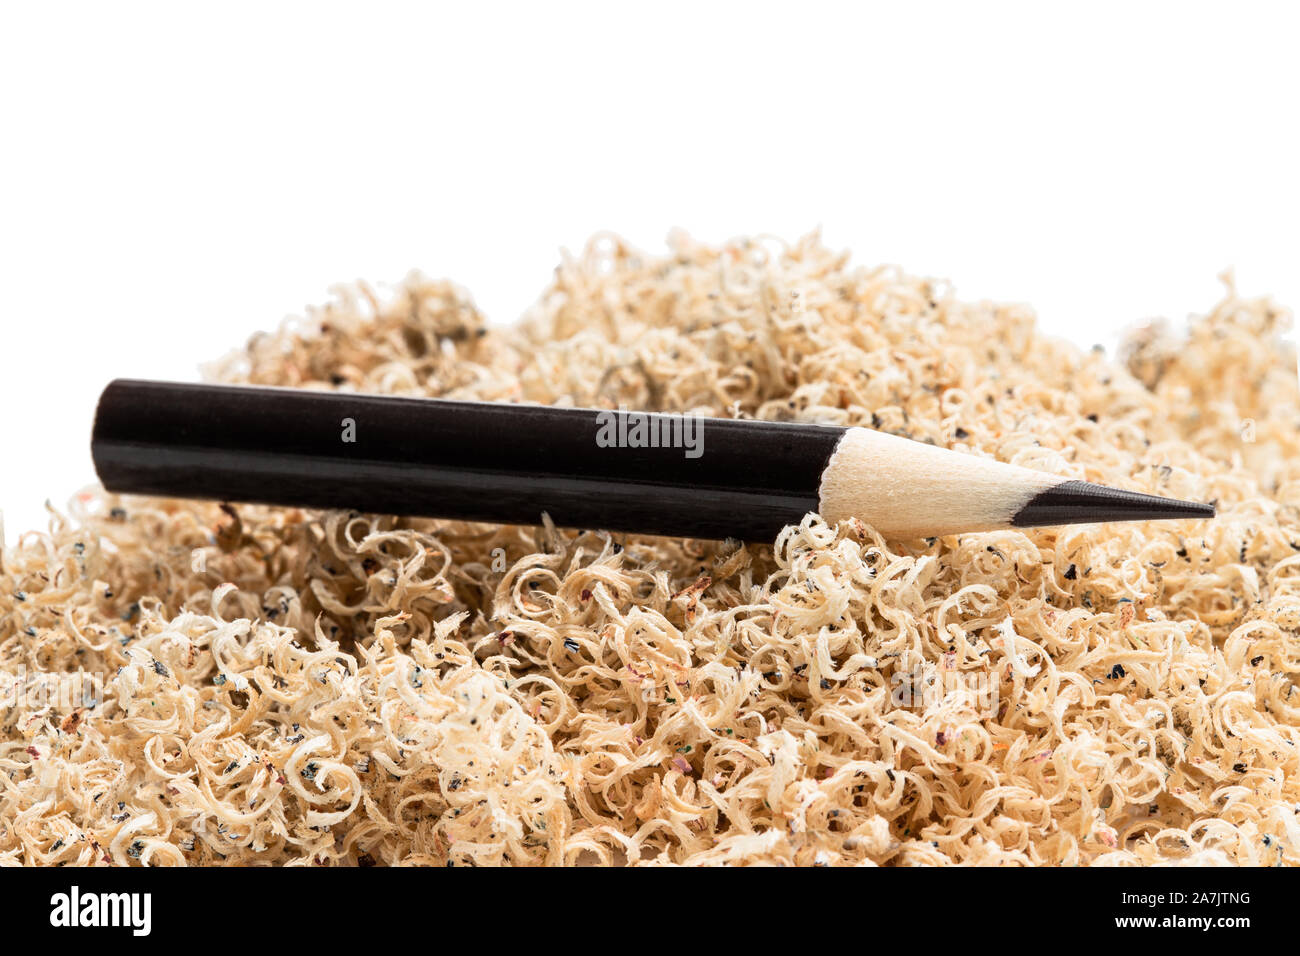 Oversharpened  pencil in front of the heap of shavings. Concept of the fruitless design or art work Stock Photo